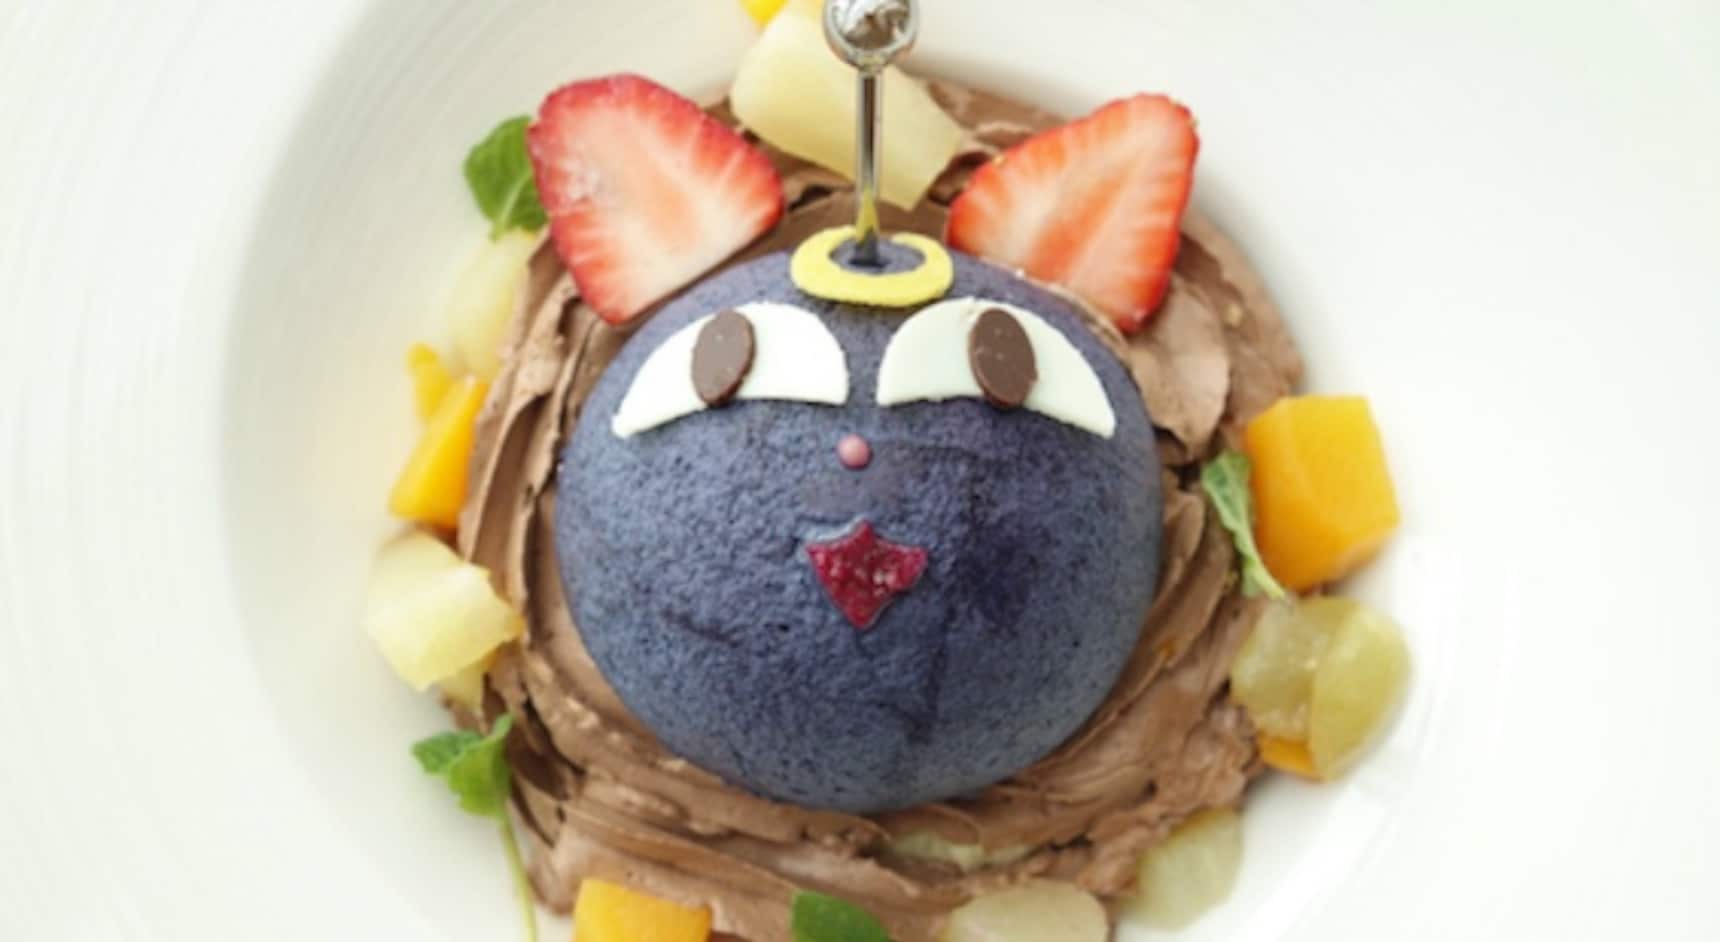 Treat Yourself to Some Sailor Moon Munchies